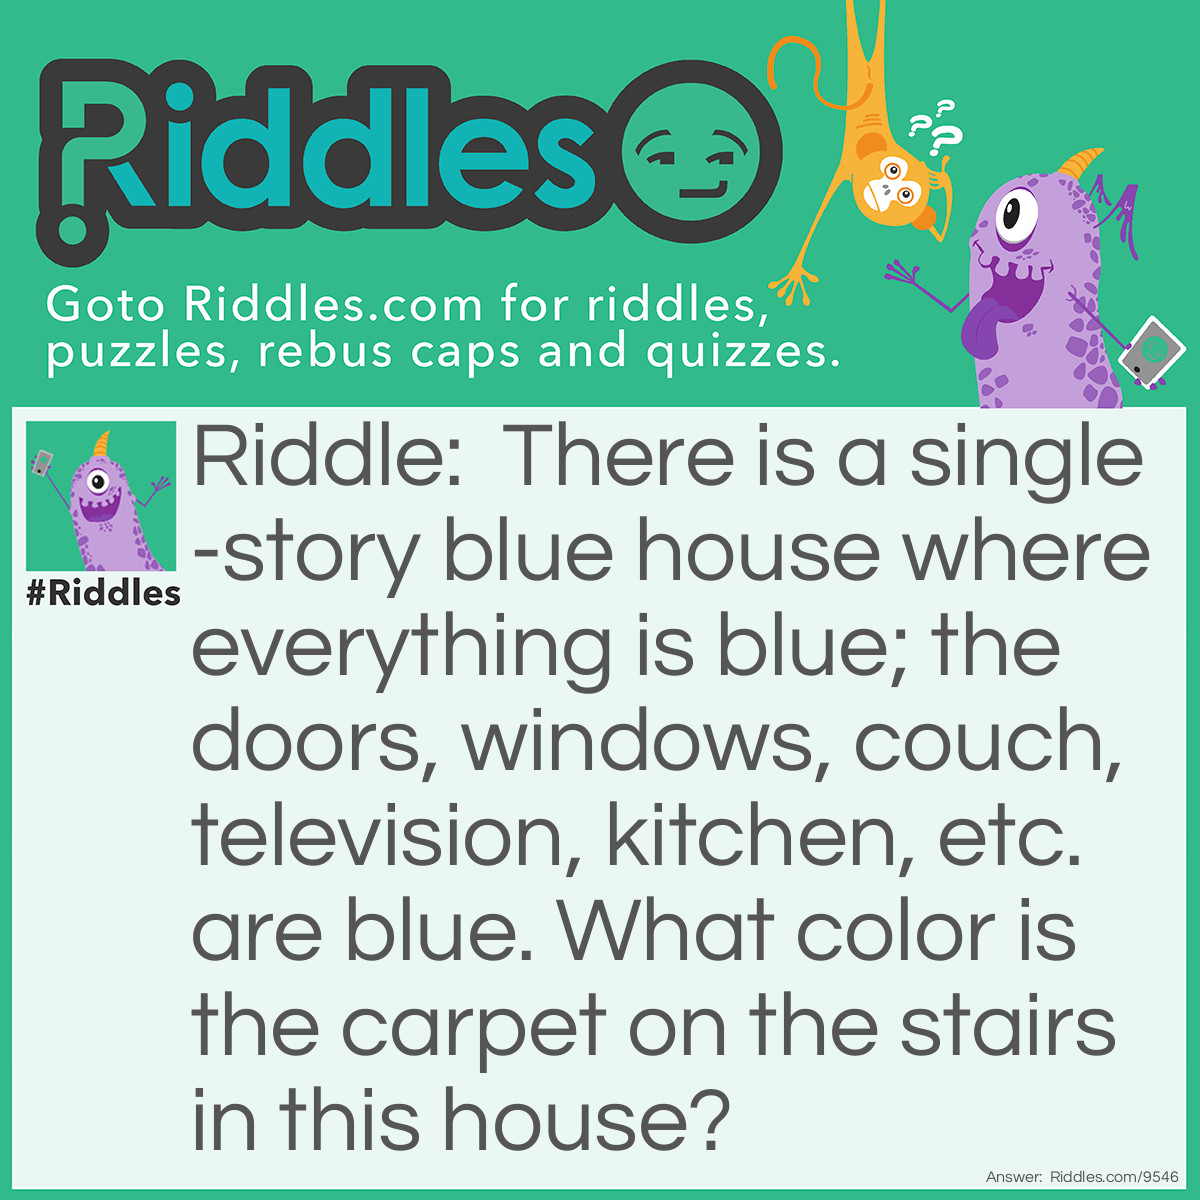 Riddle: There is a single-story blue house where everything is blue; the doors, windows, couch, television, kitchen, etc. are blue. What color is the carpet on the stairs in this house? Answer: There are no stairs, it’s a one-story house.